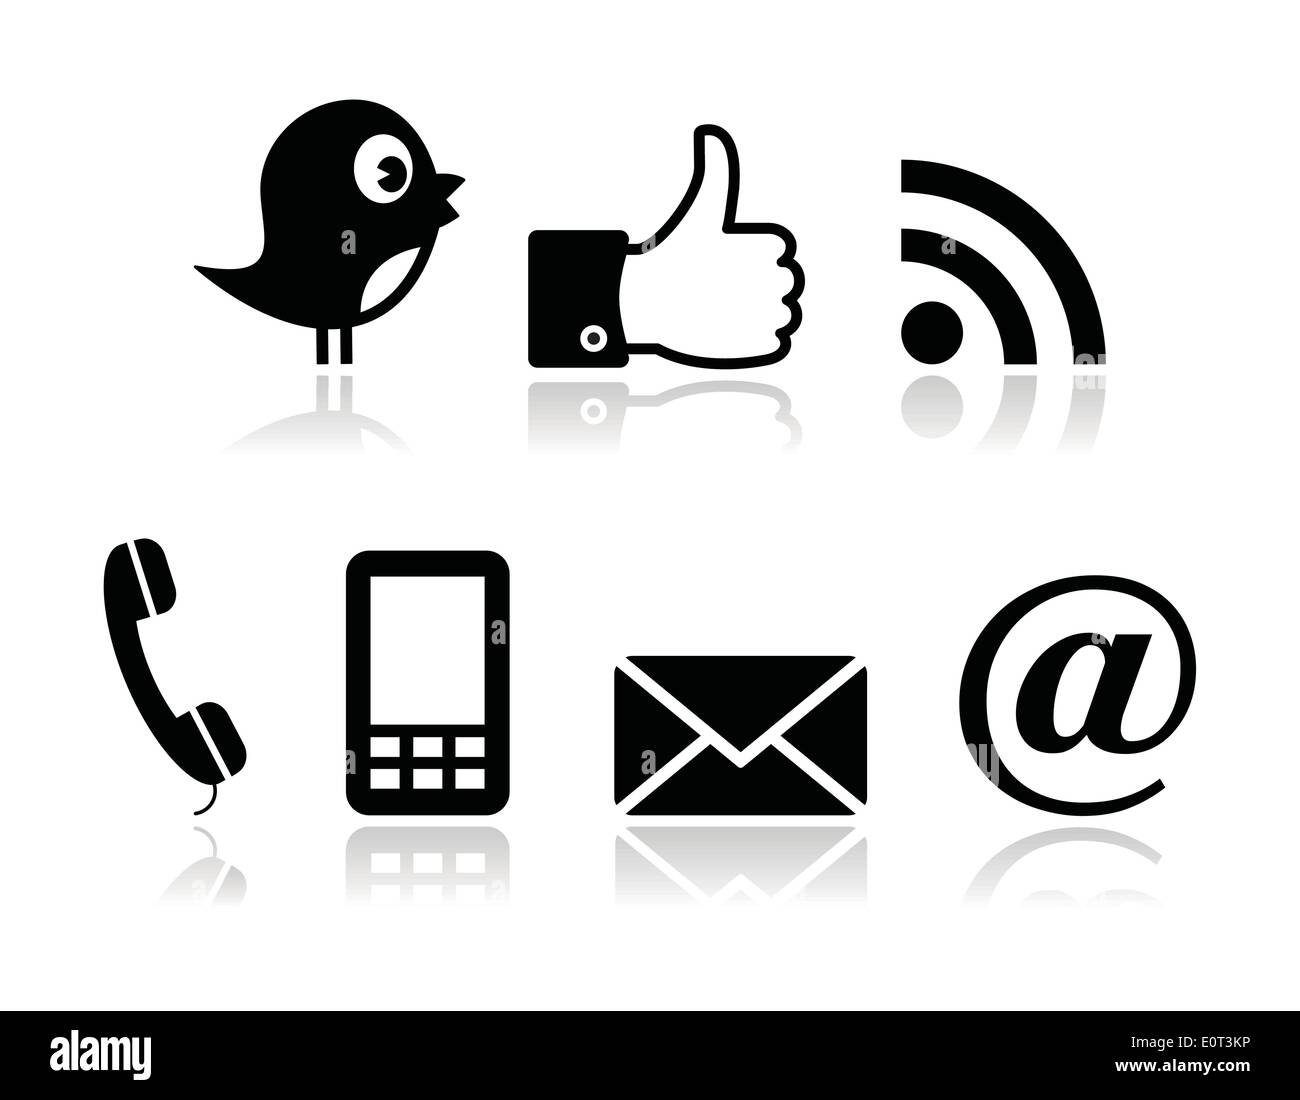 Contact and social media icons set- twitter, facebook, rss Stock Vector